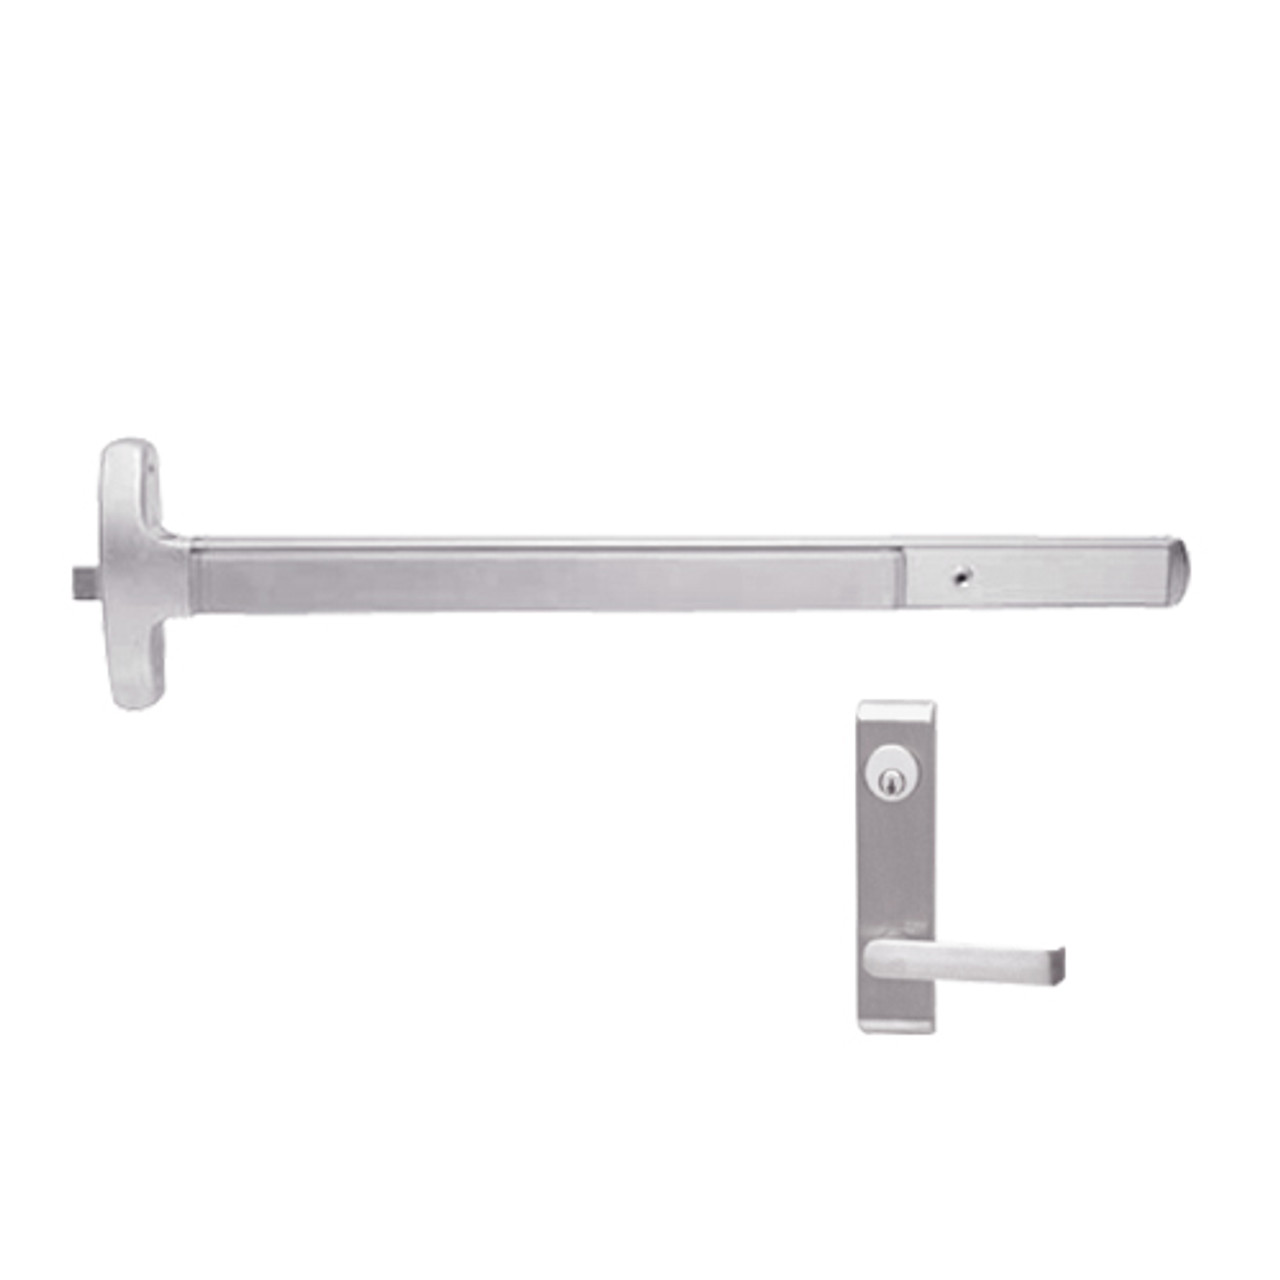 24-R-L-DANE-US32-3-LHR Falcon Exit Device in Polished Stainless Steel